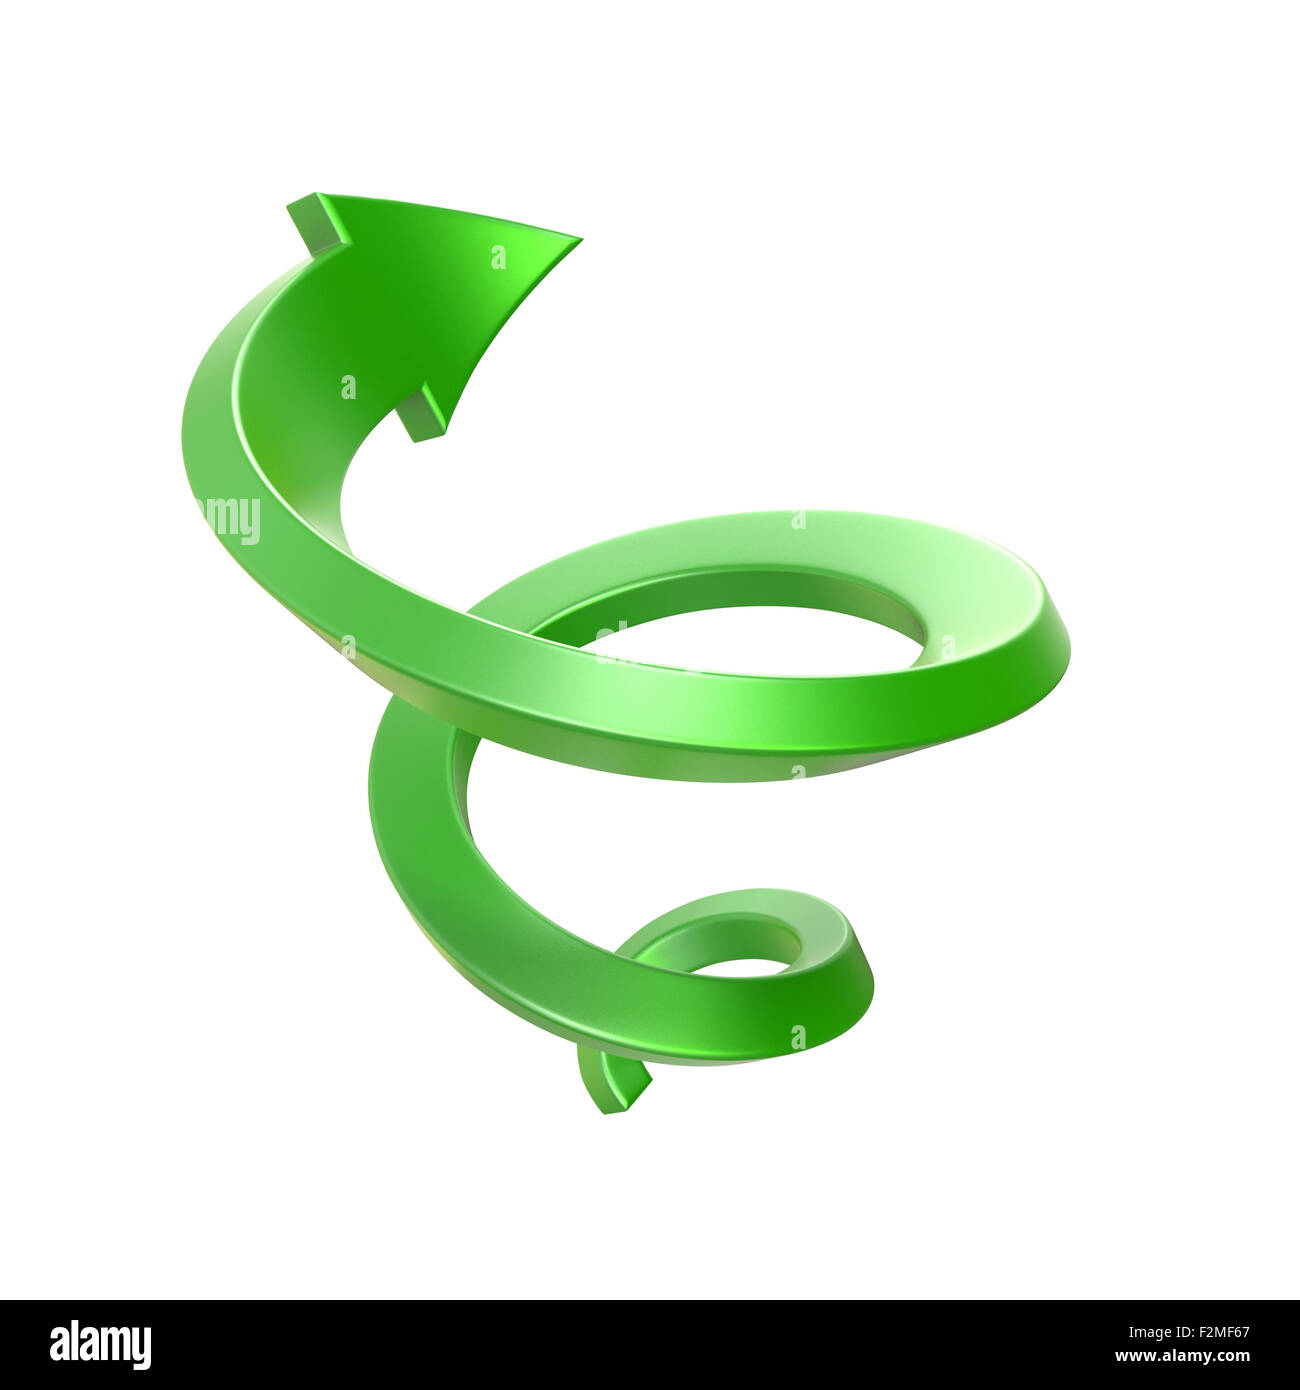 Green spiral arrow. Side view. 3D render illustration isolated on white background Stock Photo